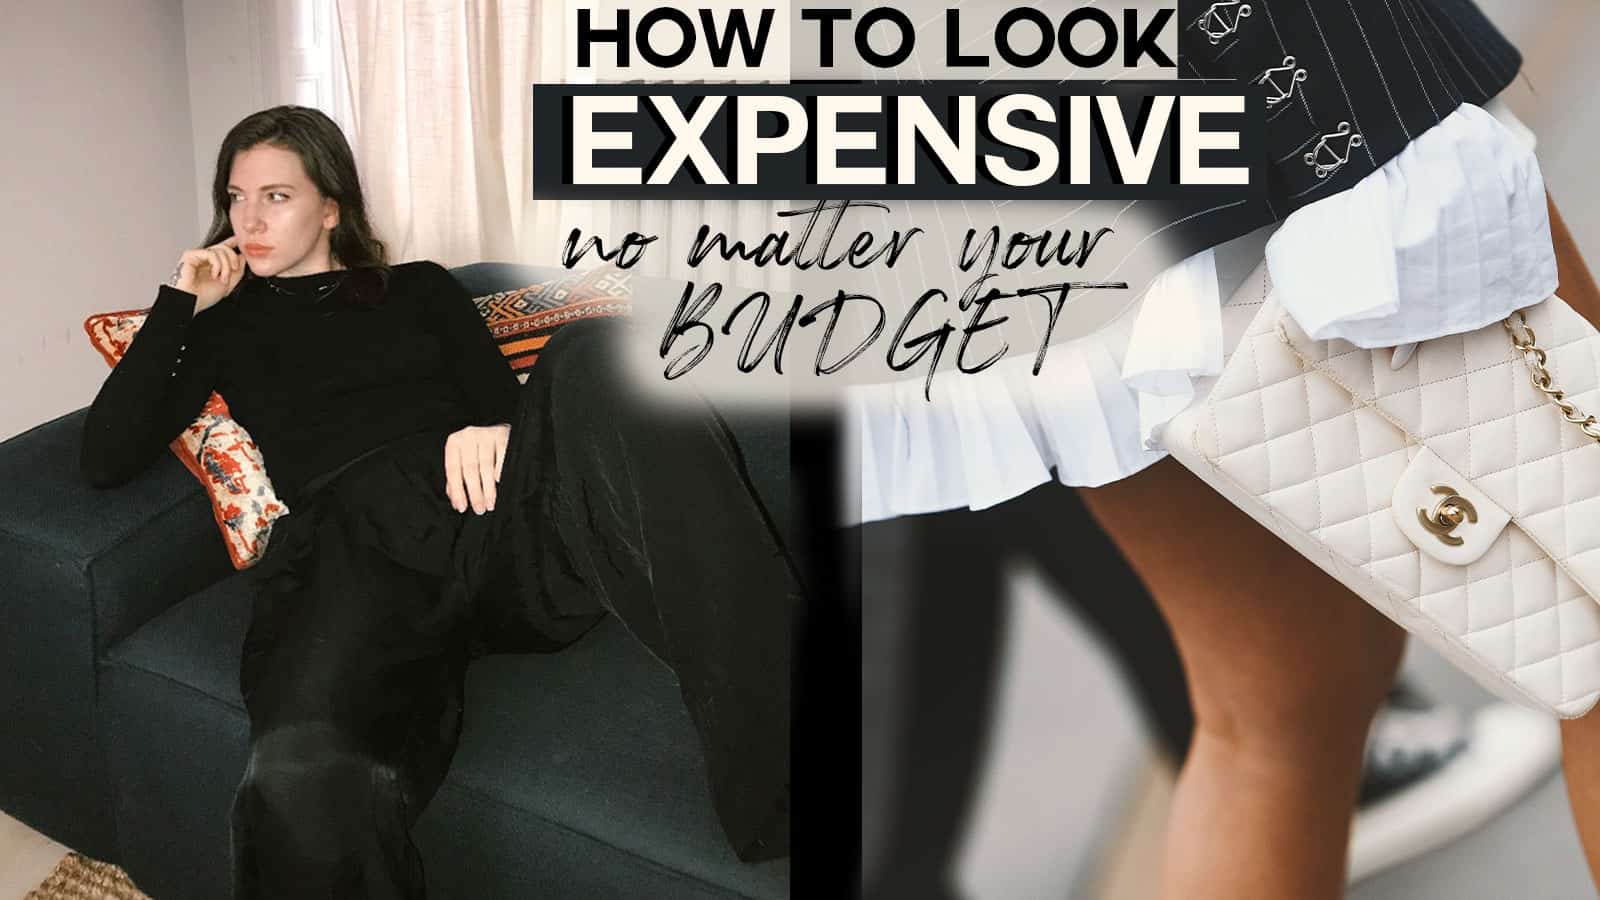 9 tips to look expensive, and all the things to AVOID!